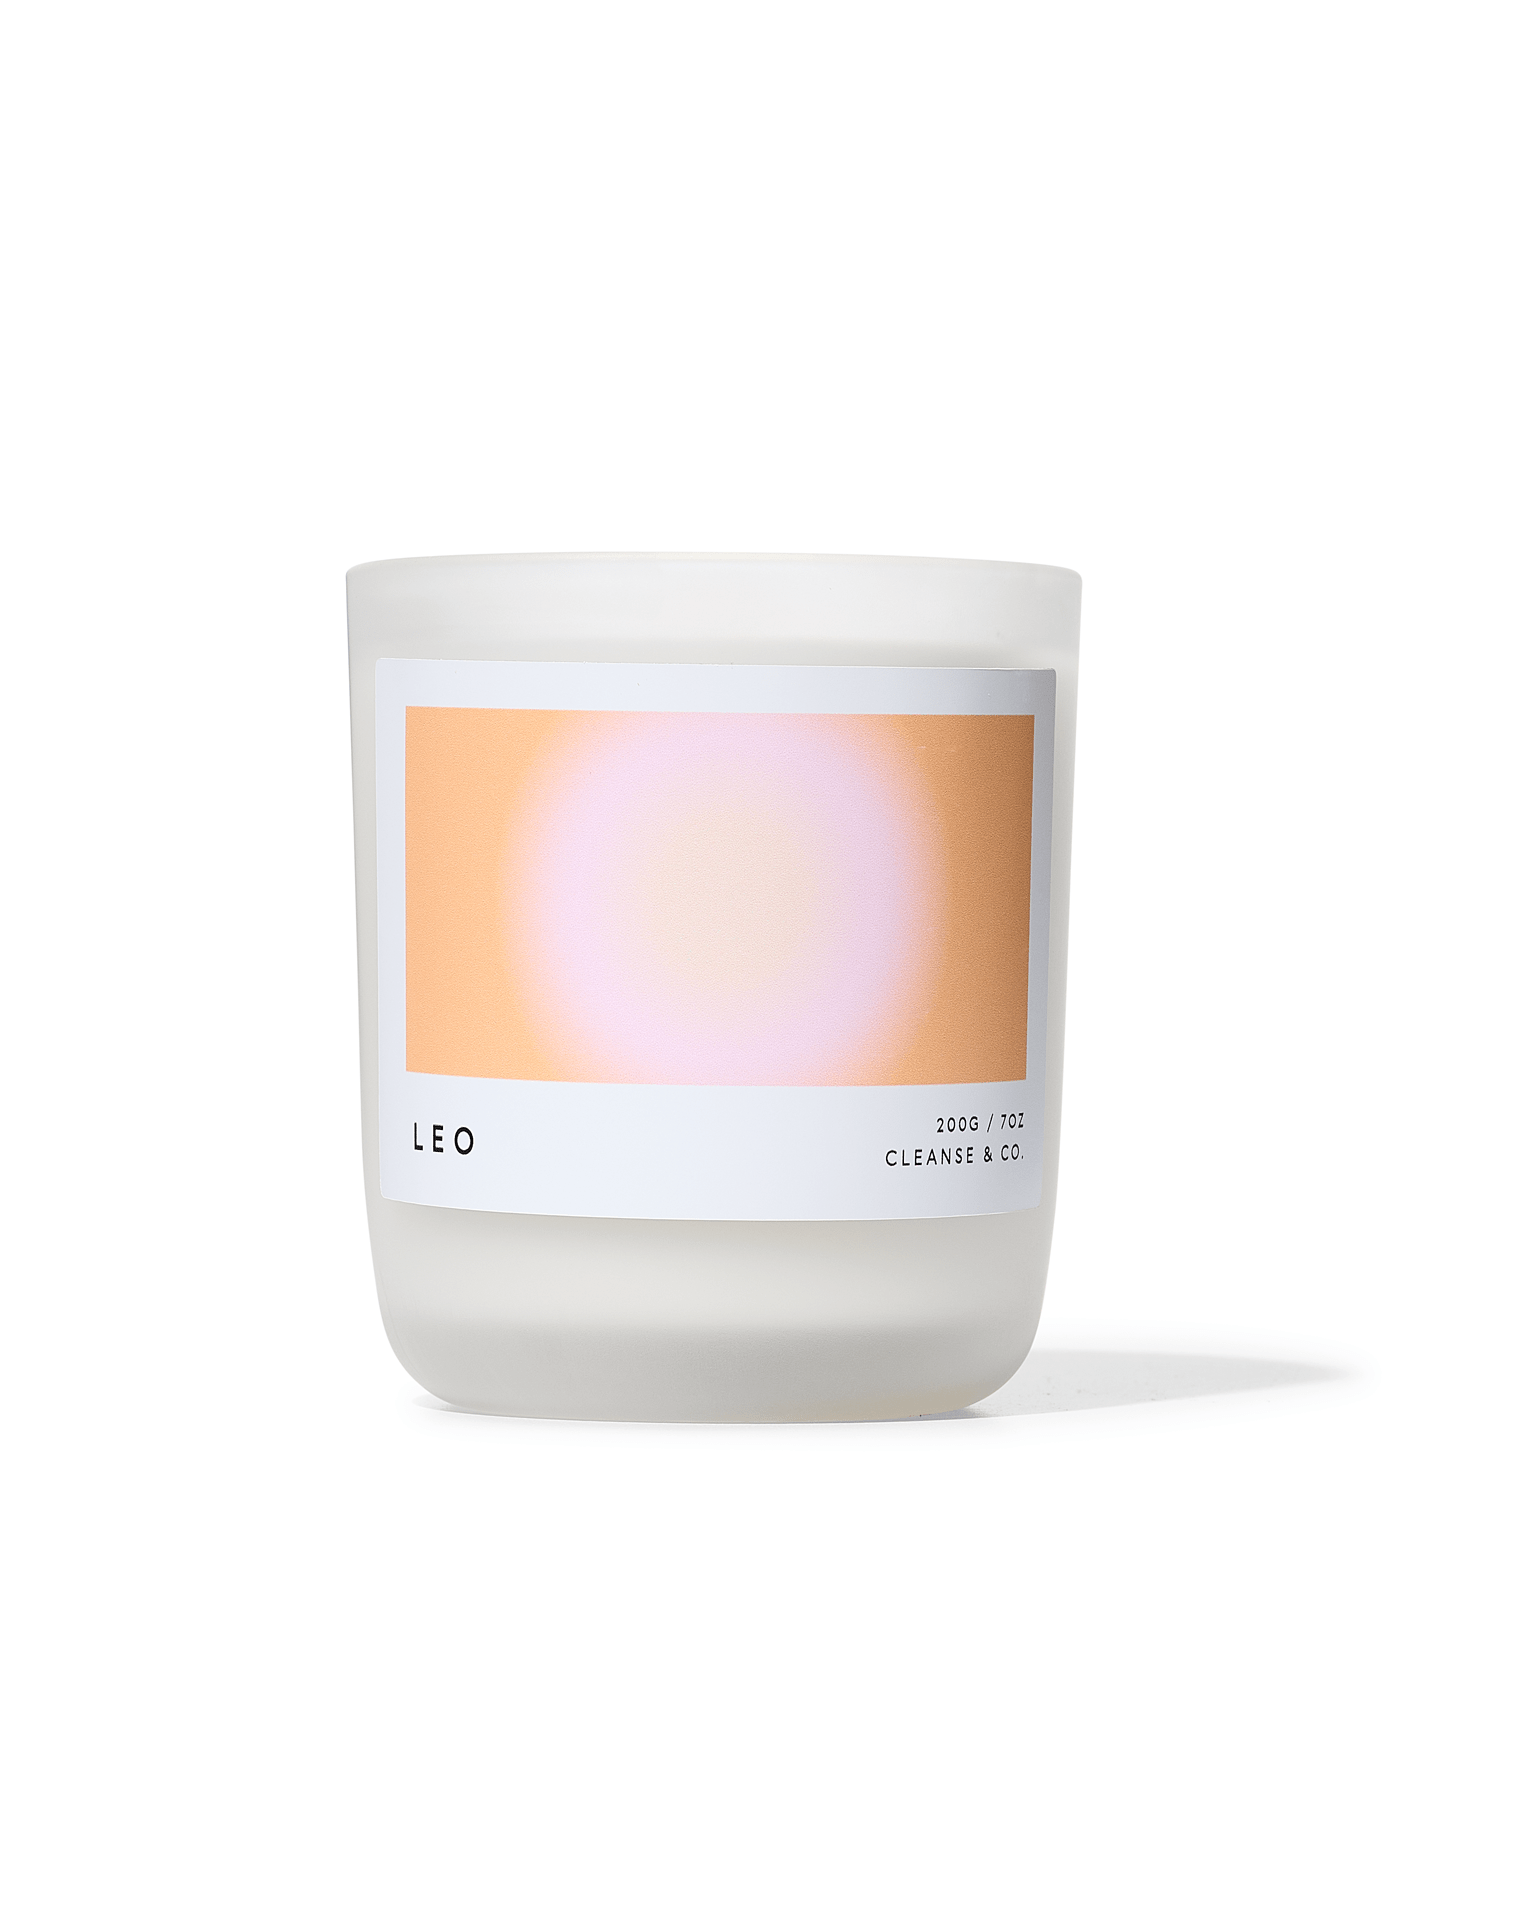 Leo - Aura Candle: 200G / Grapefruit & White Orchid by Cleanse & Co.